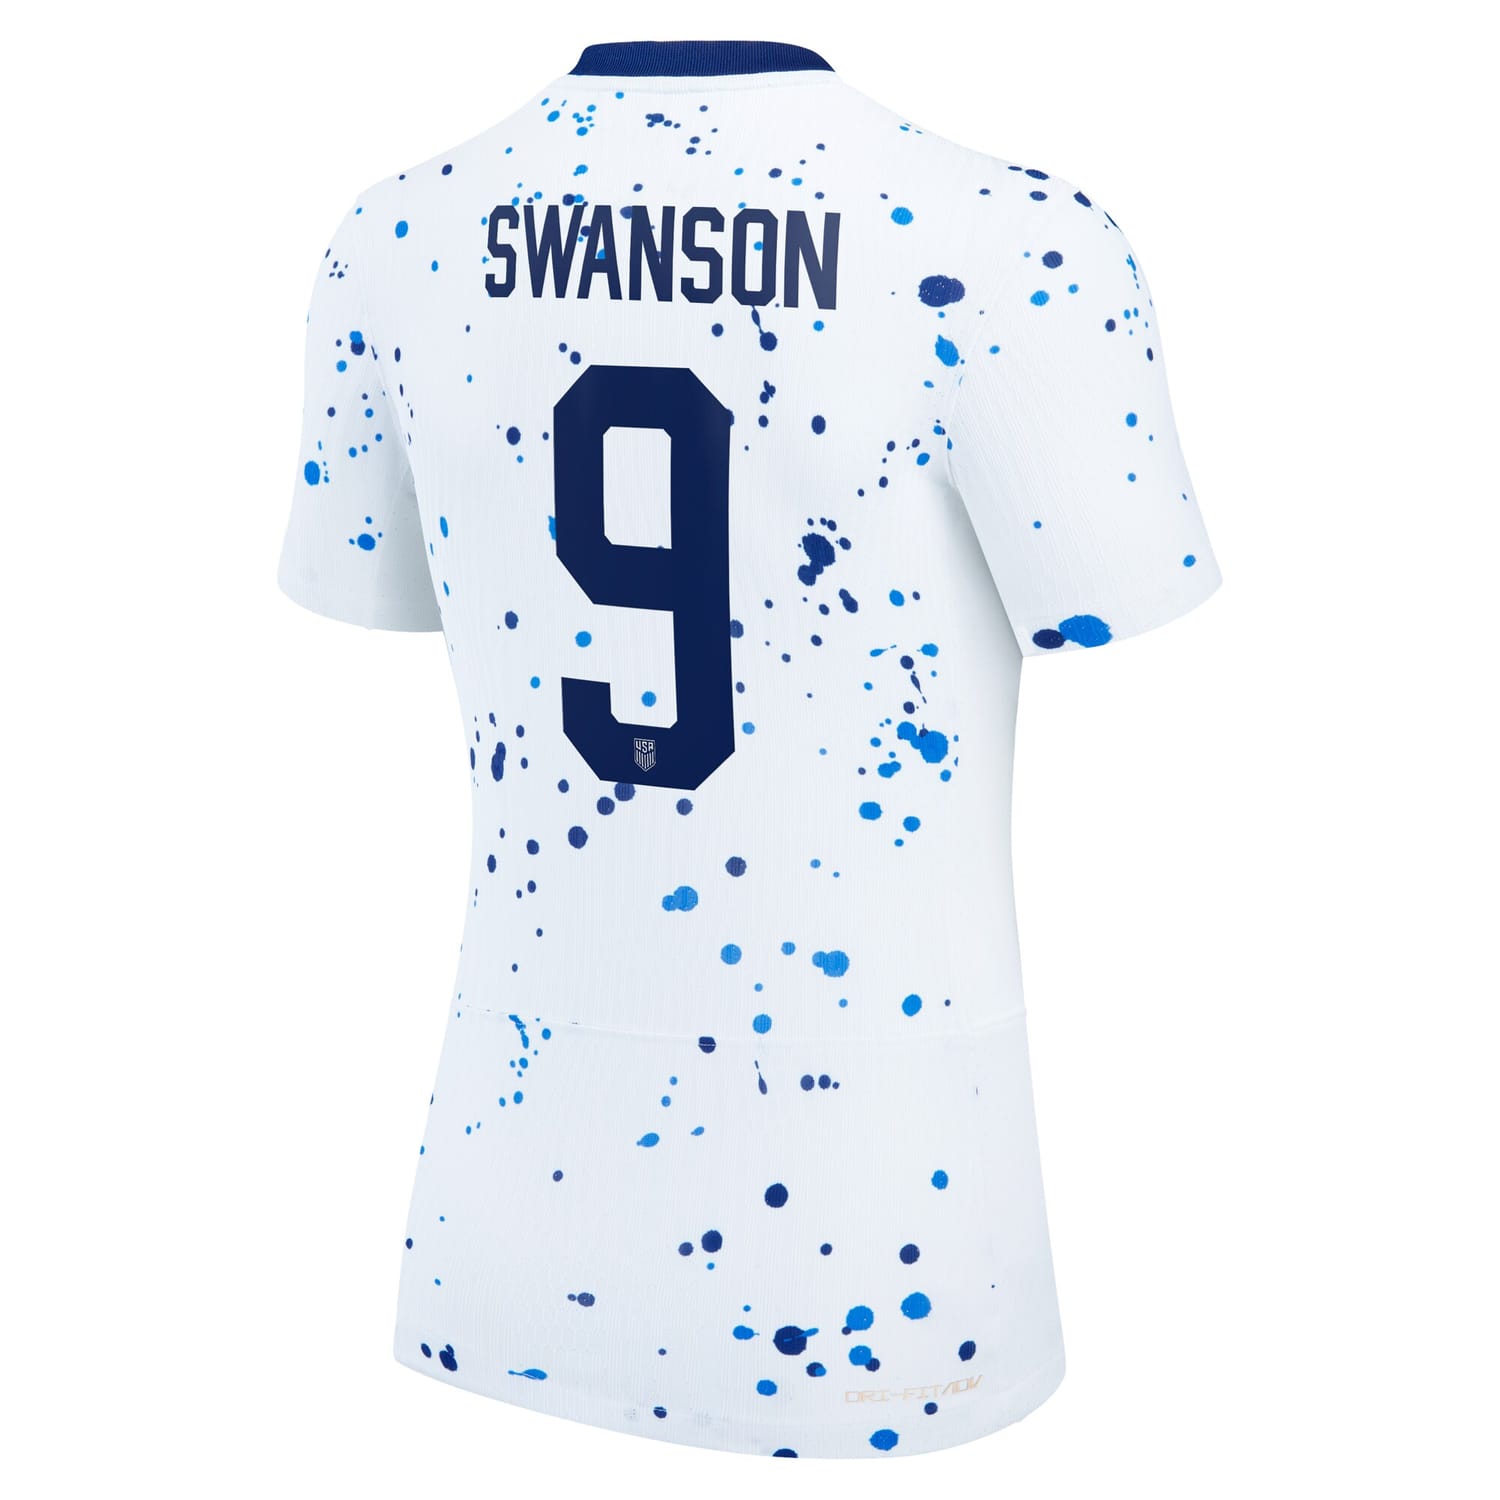 USWNT Home Authentic Jersey Shirt White 2023 player Mallory Swanson printing for Women